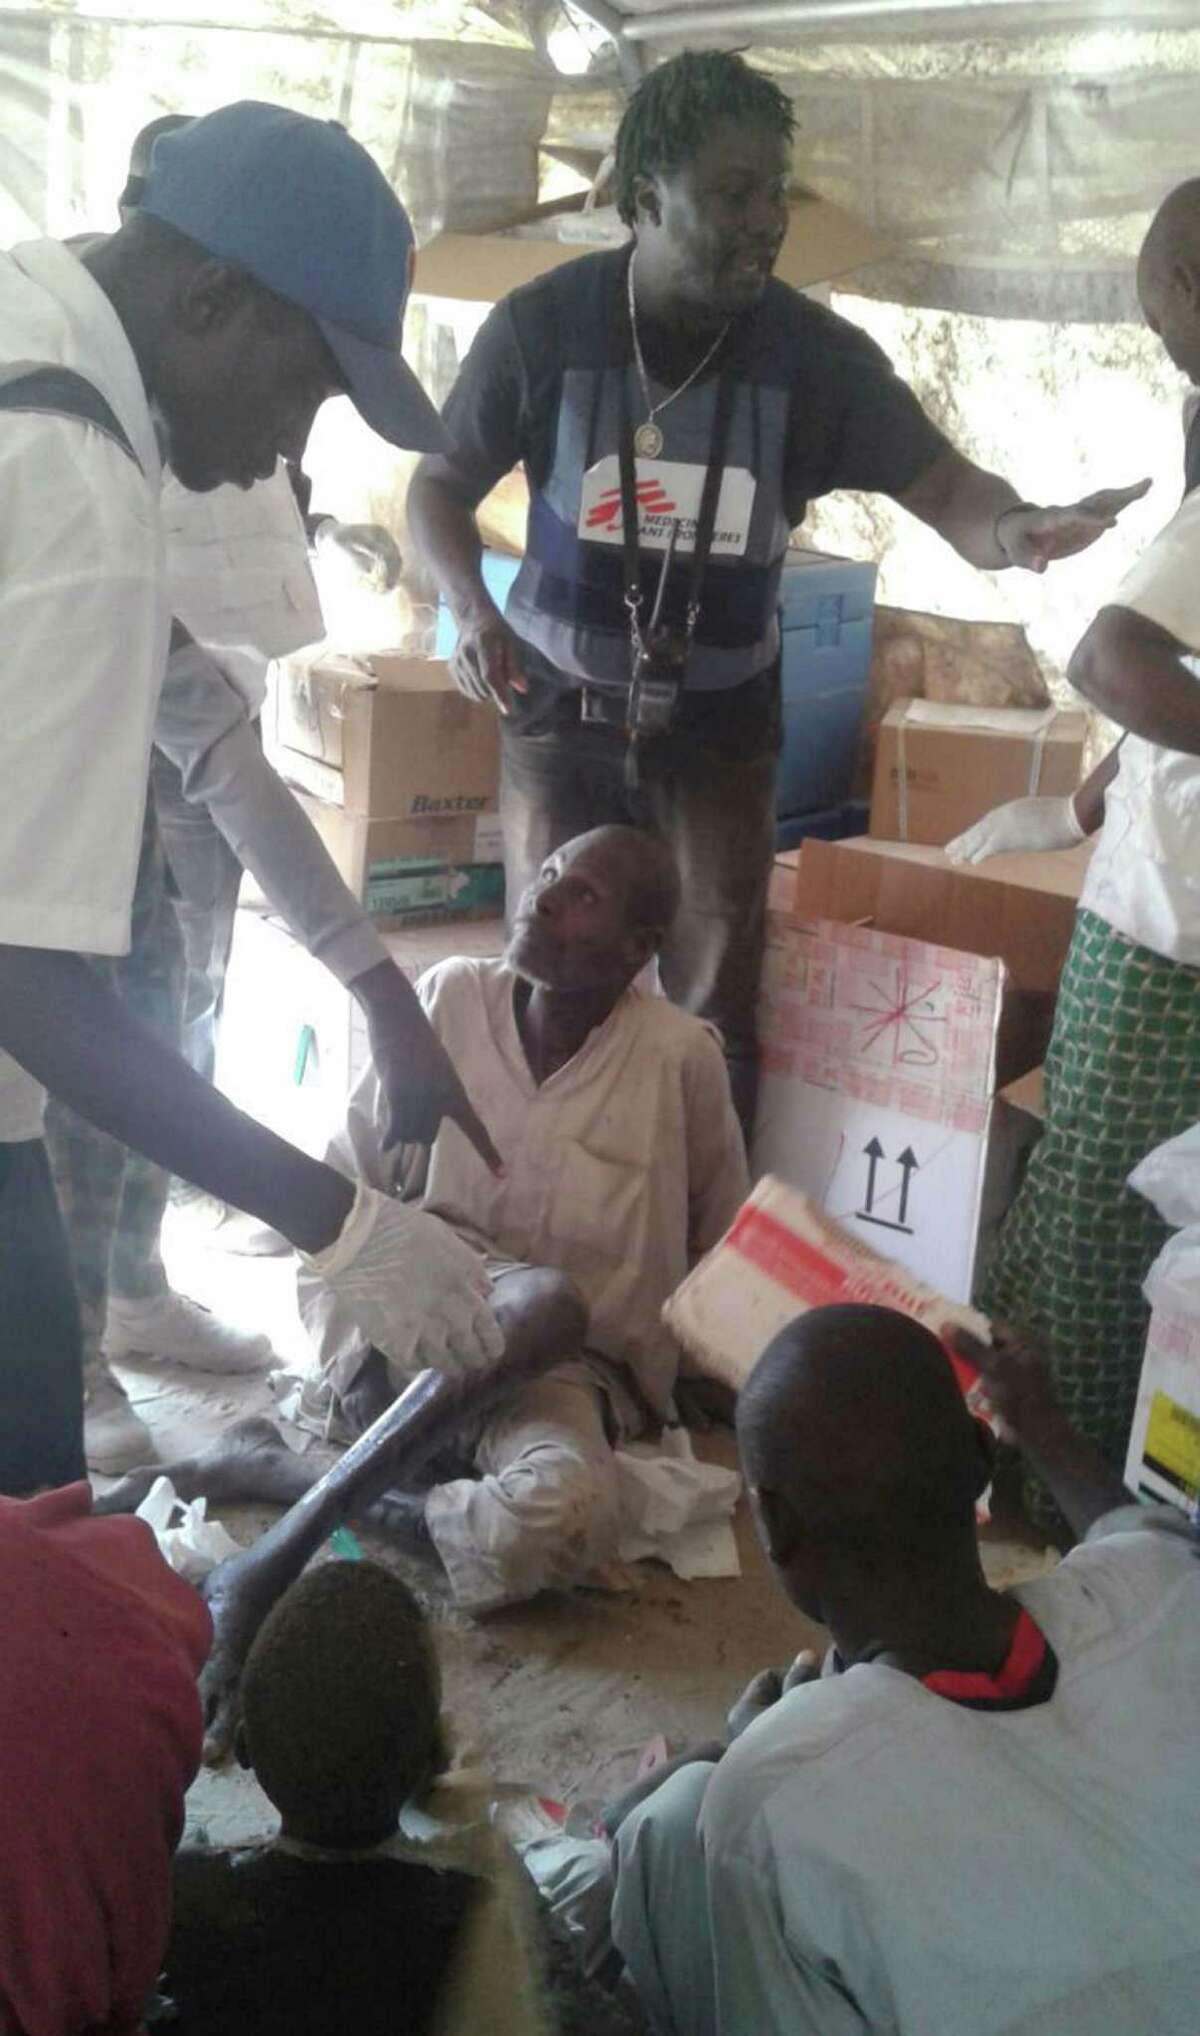 In this image supplied by MSF, victims receive first aid following a military air strike at a camp for displaced people in Rann, Nigeria, Tuesday Jan. 17, 2017. Relief volunteers are believed to be among the more than 100 dead after a Nigerian Air Force jet fighter mistakenly bombed the refugee camp, while on a mission against Boko Haram extremists. (Medecins Sans Frontieres (MSF) via AP)